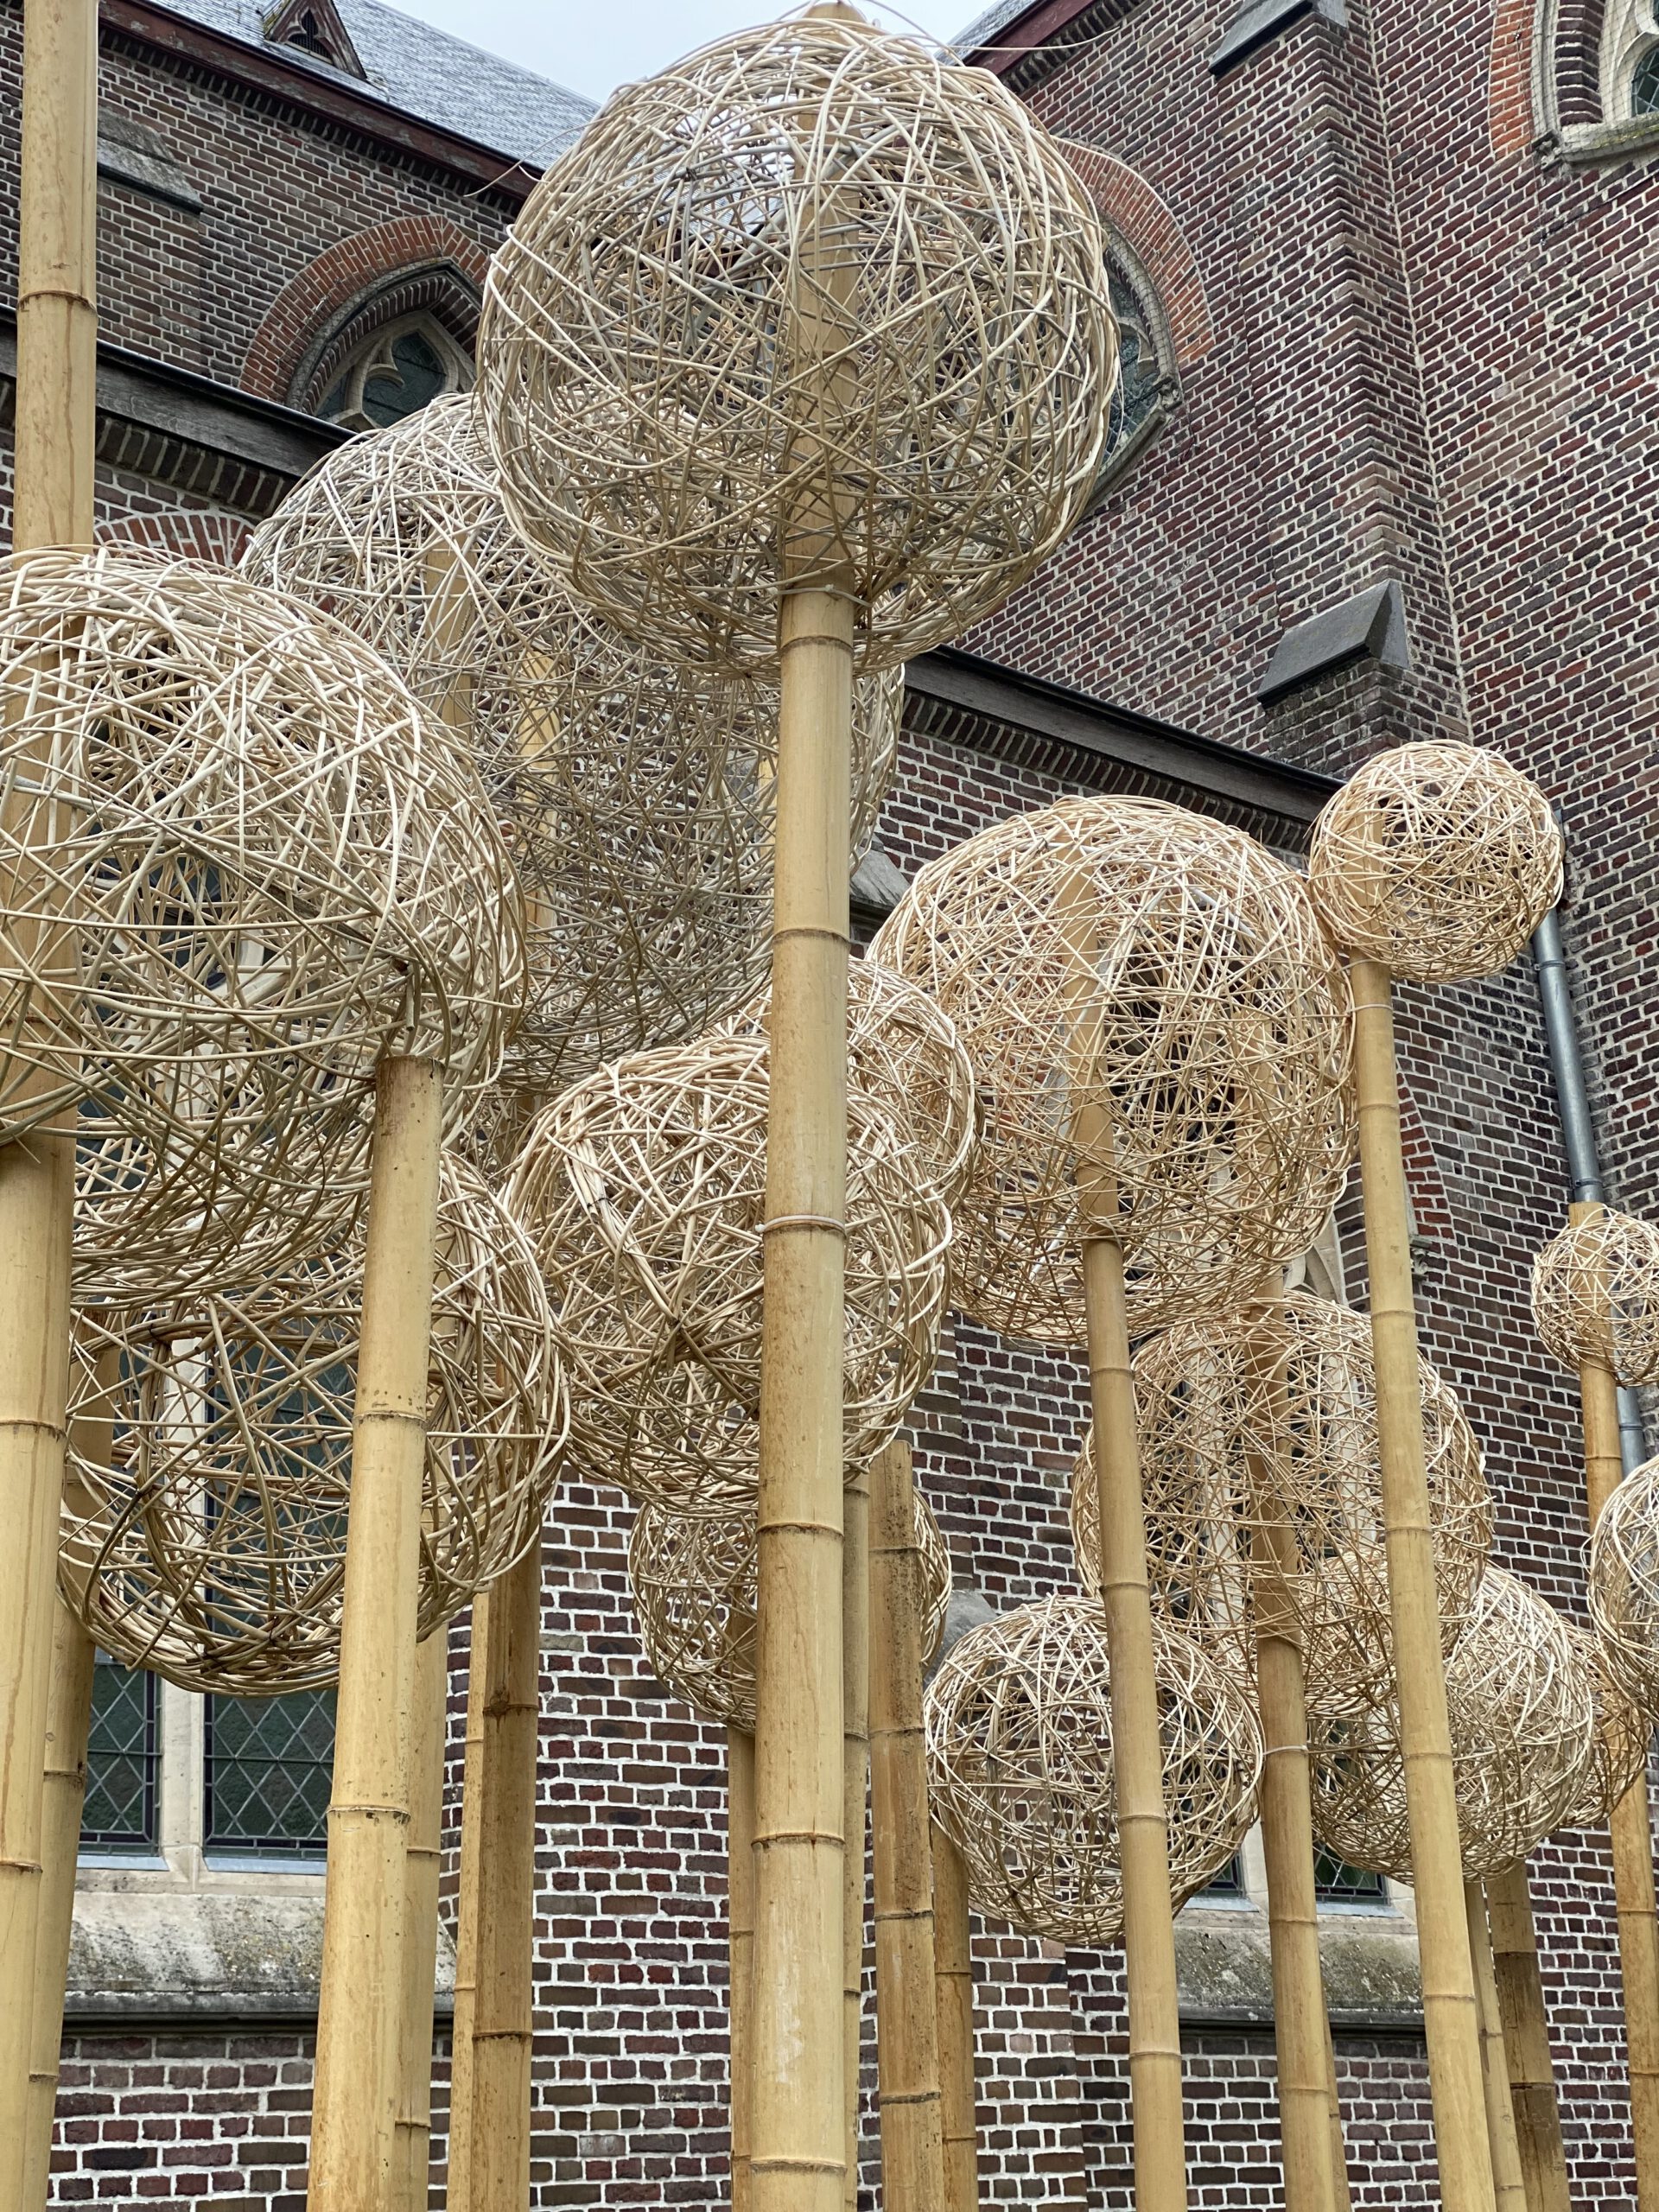 A FANTASTIC LAND-ART PROJECT BY GEERT PATTYN IN THE COAST AREA OF FLANDERS - the cathedral close up - An Theunynck blog on thursd